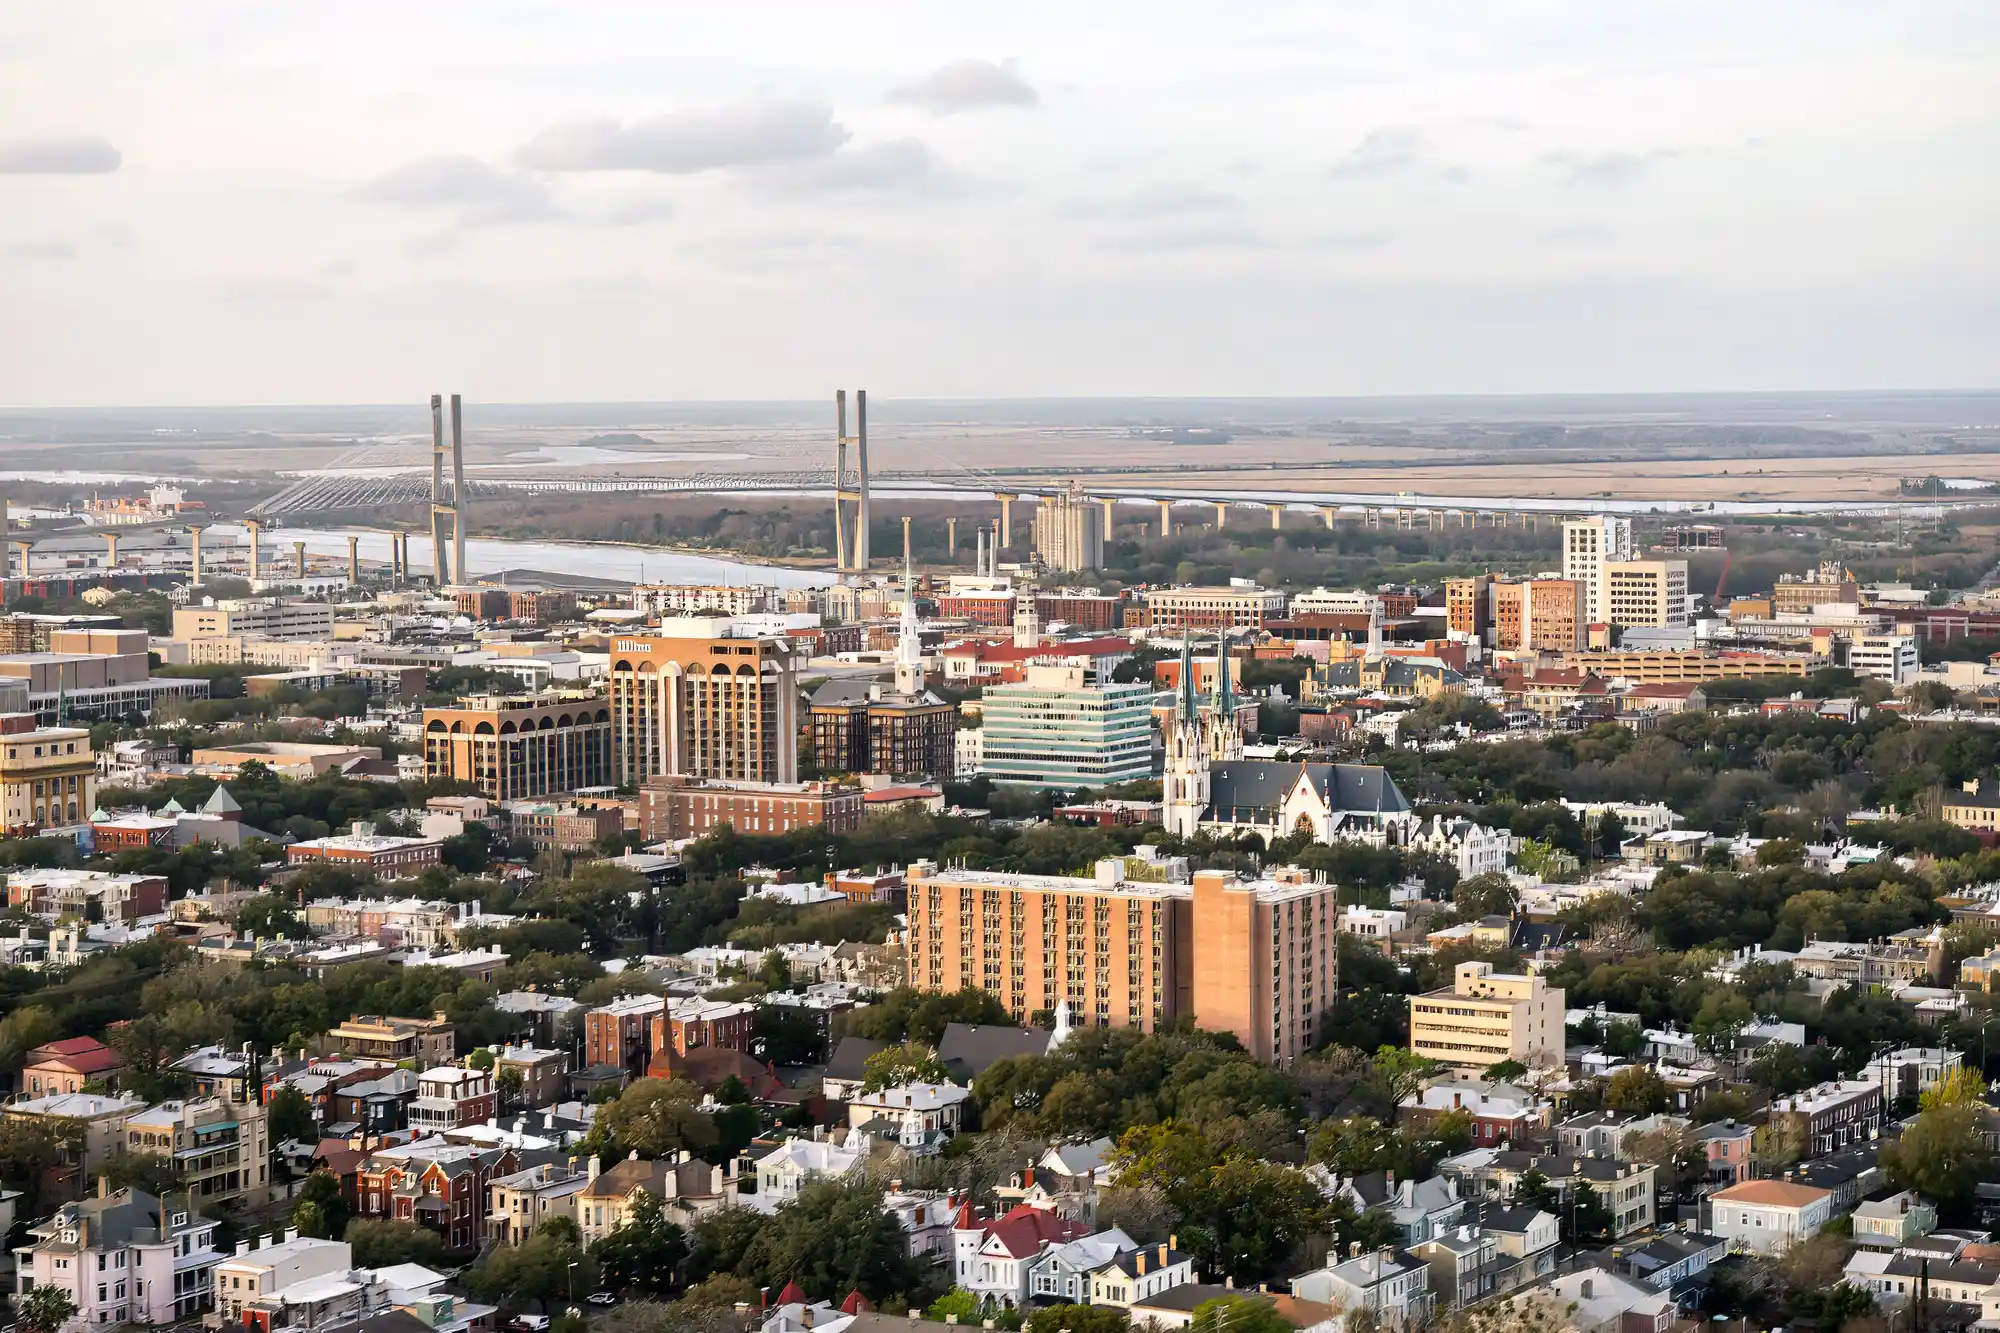 Savannah from above with bridge and cathedral taken during a helicopter tour